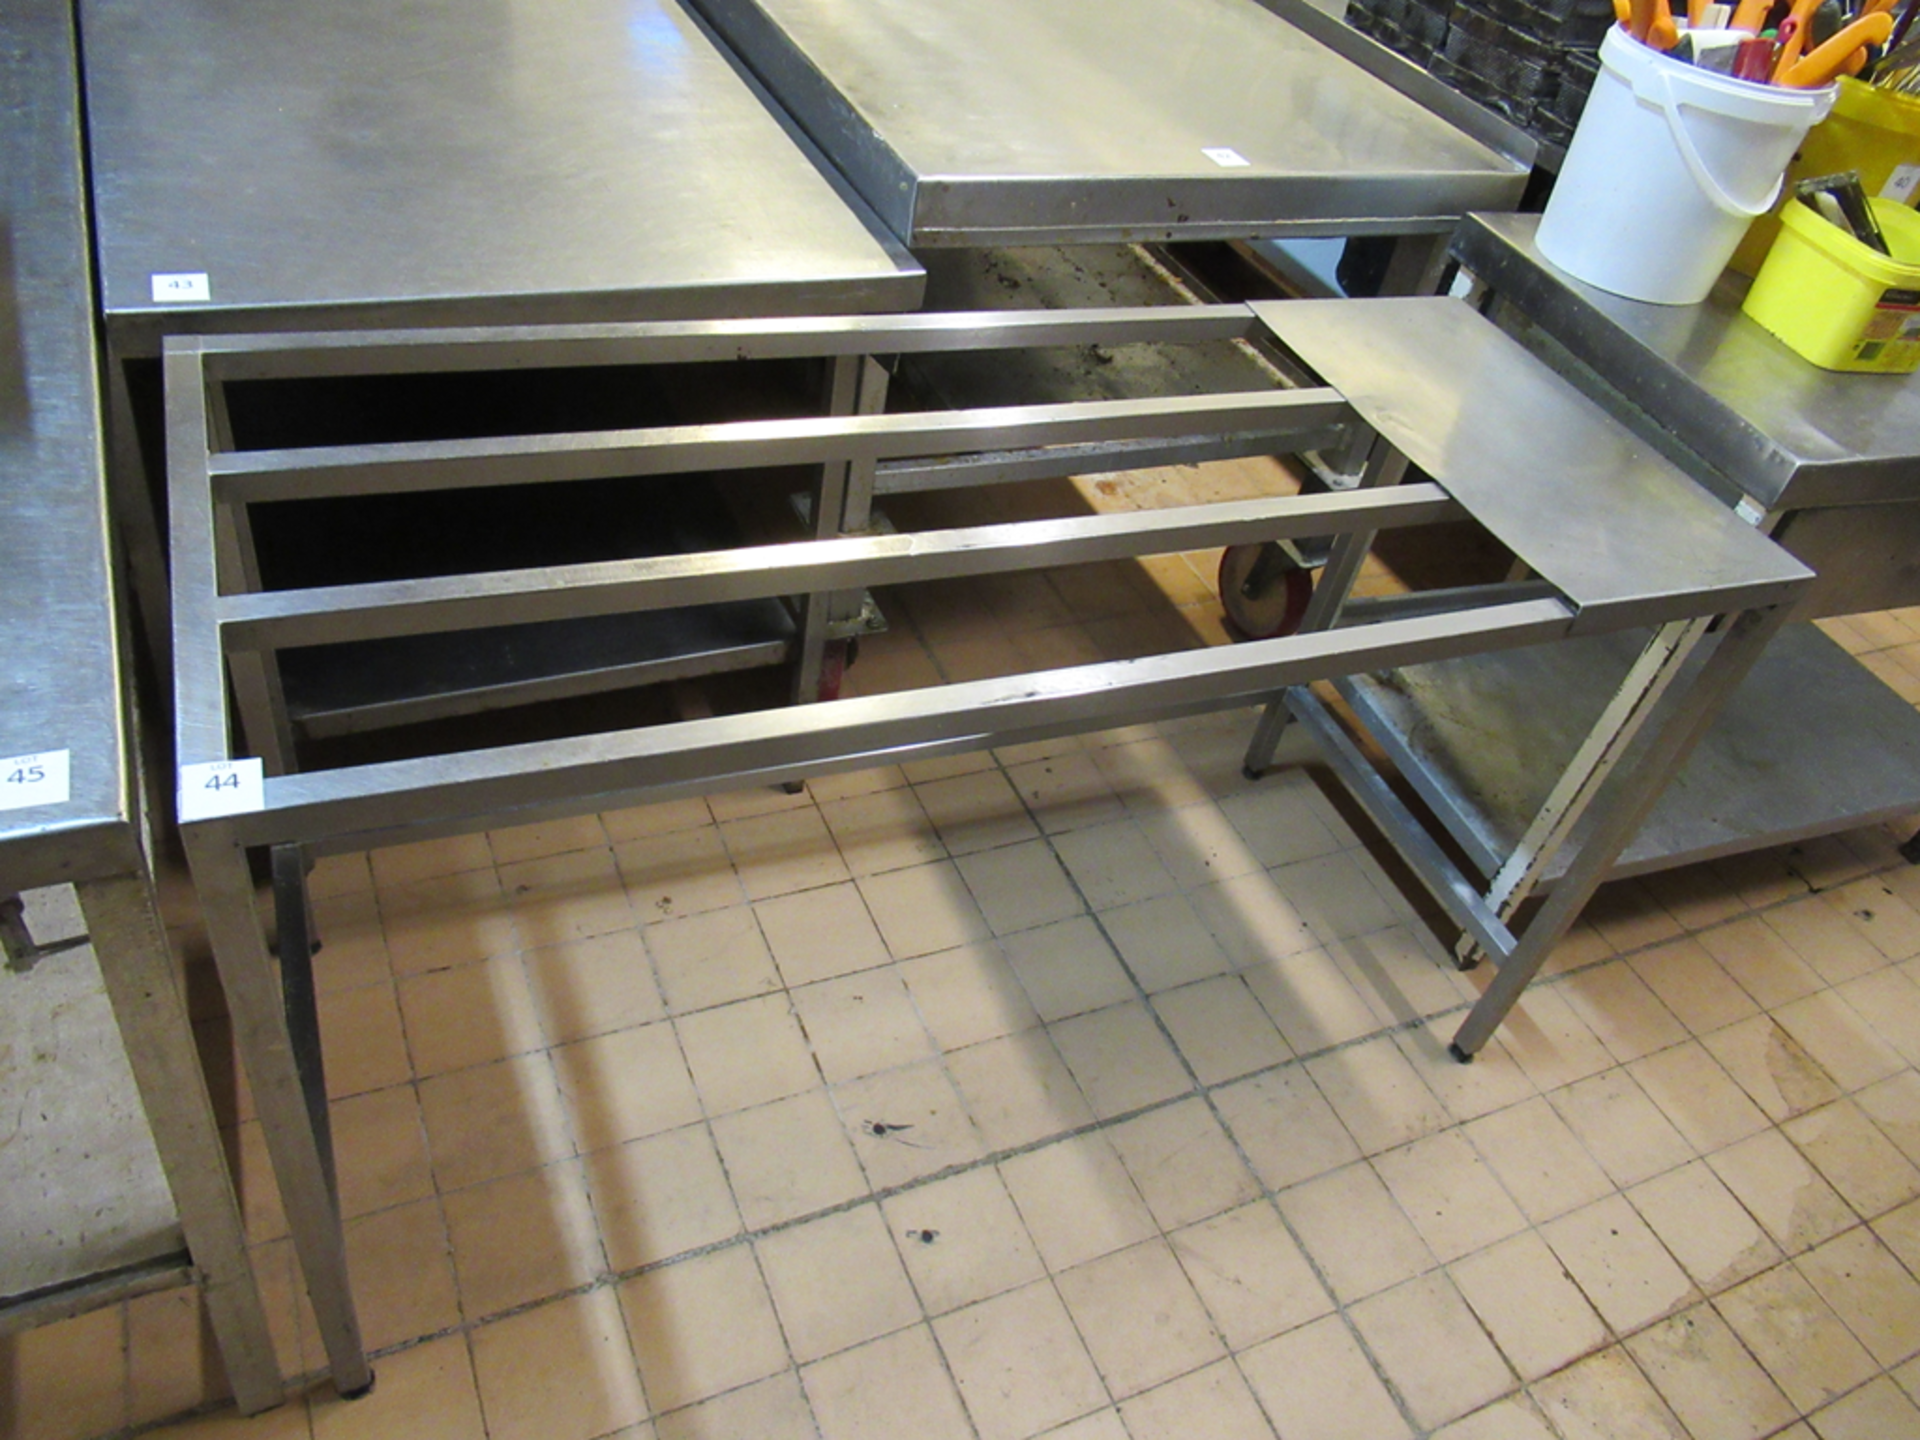 Stainless Steel Packing Stand 1460 x 600 x 840mm High and A Three Tier S/S Trolley 860 x 510 x 950mm